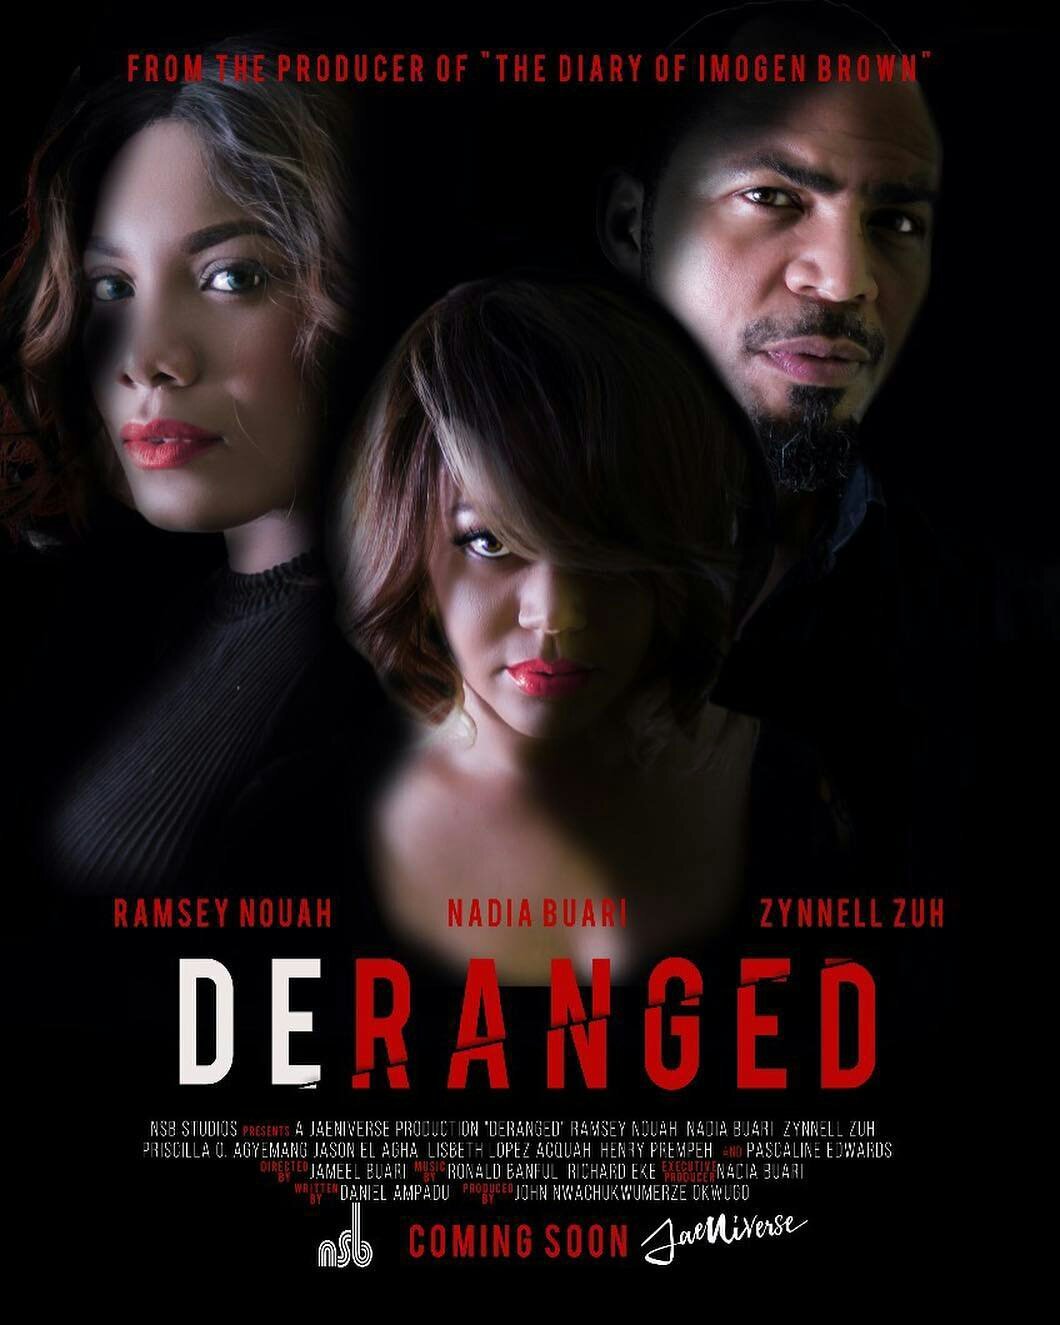 Nadia Buari’s ‘Deranged’ Movie To Be Premiered On 28th